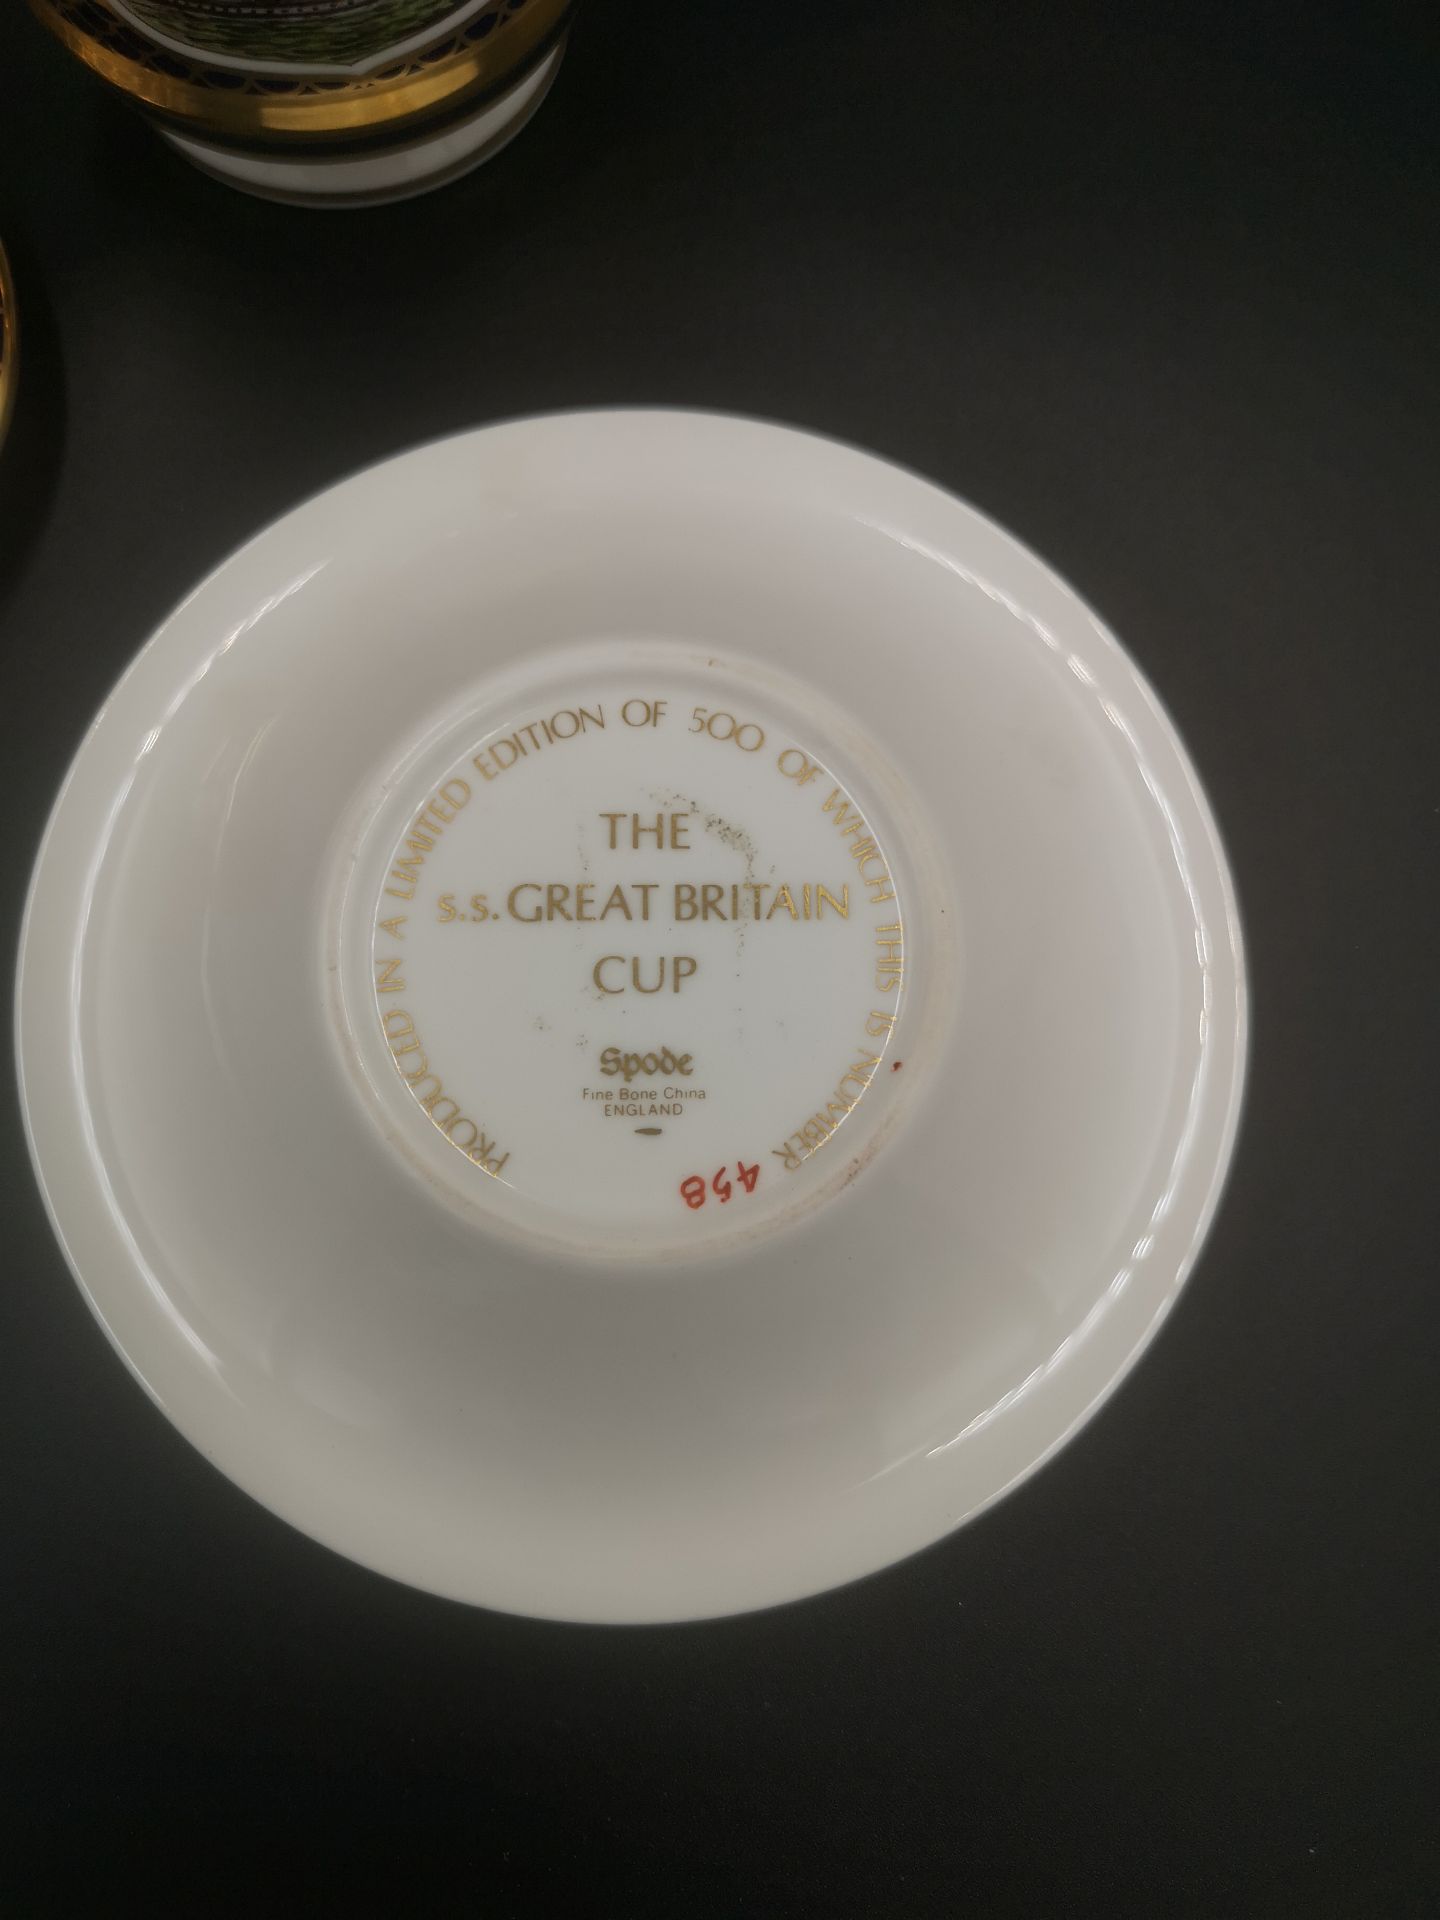 Spode limited edition cup in original box - Image 4 of 5